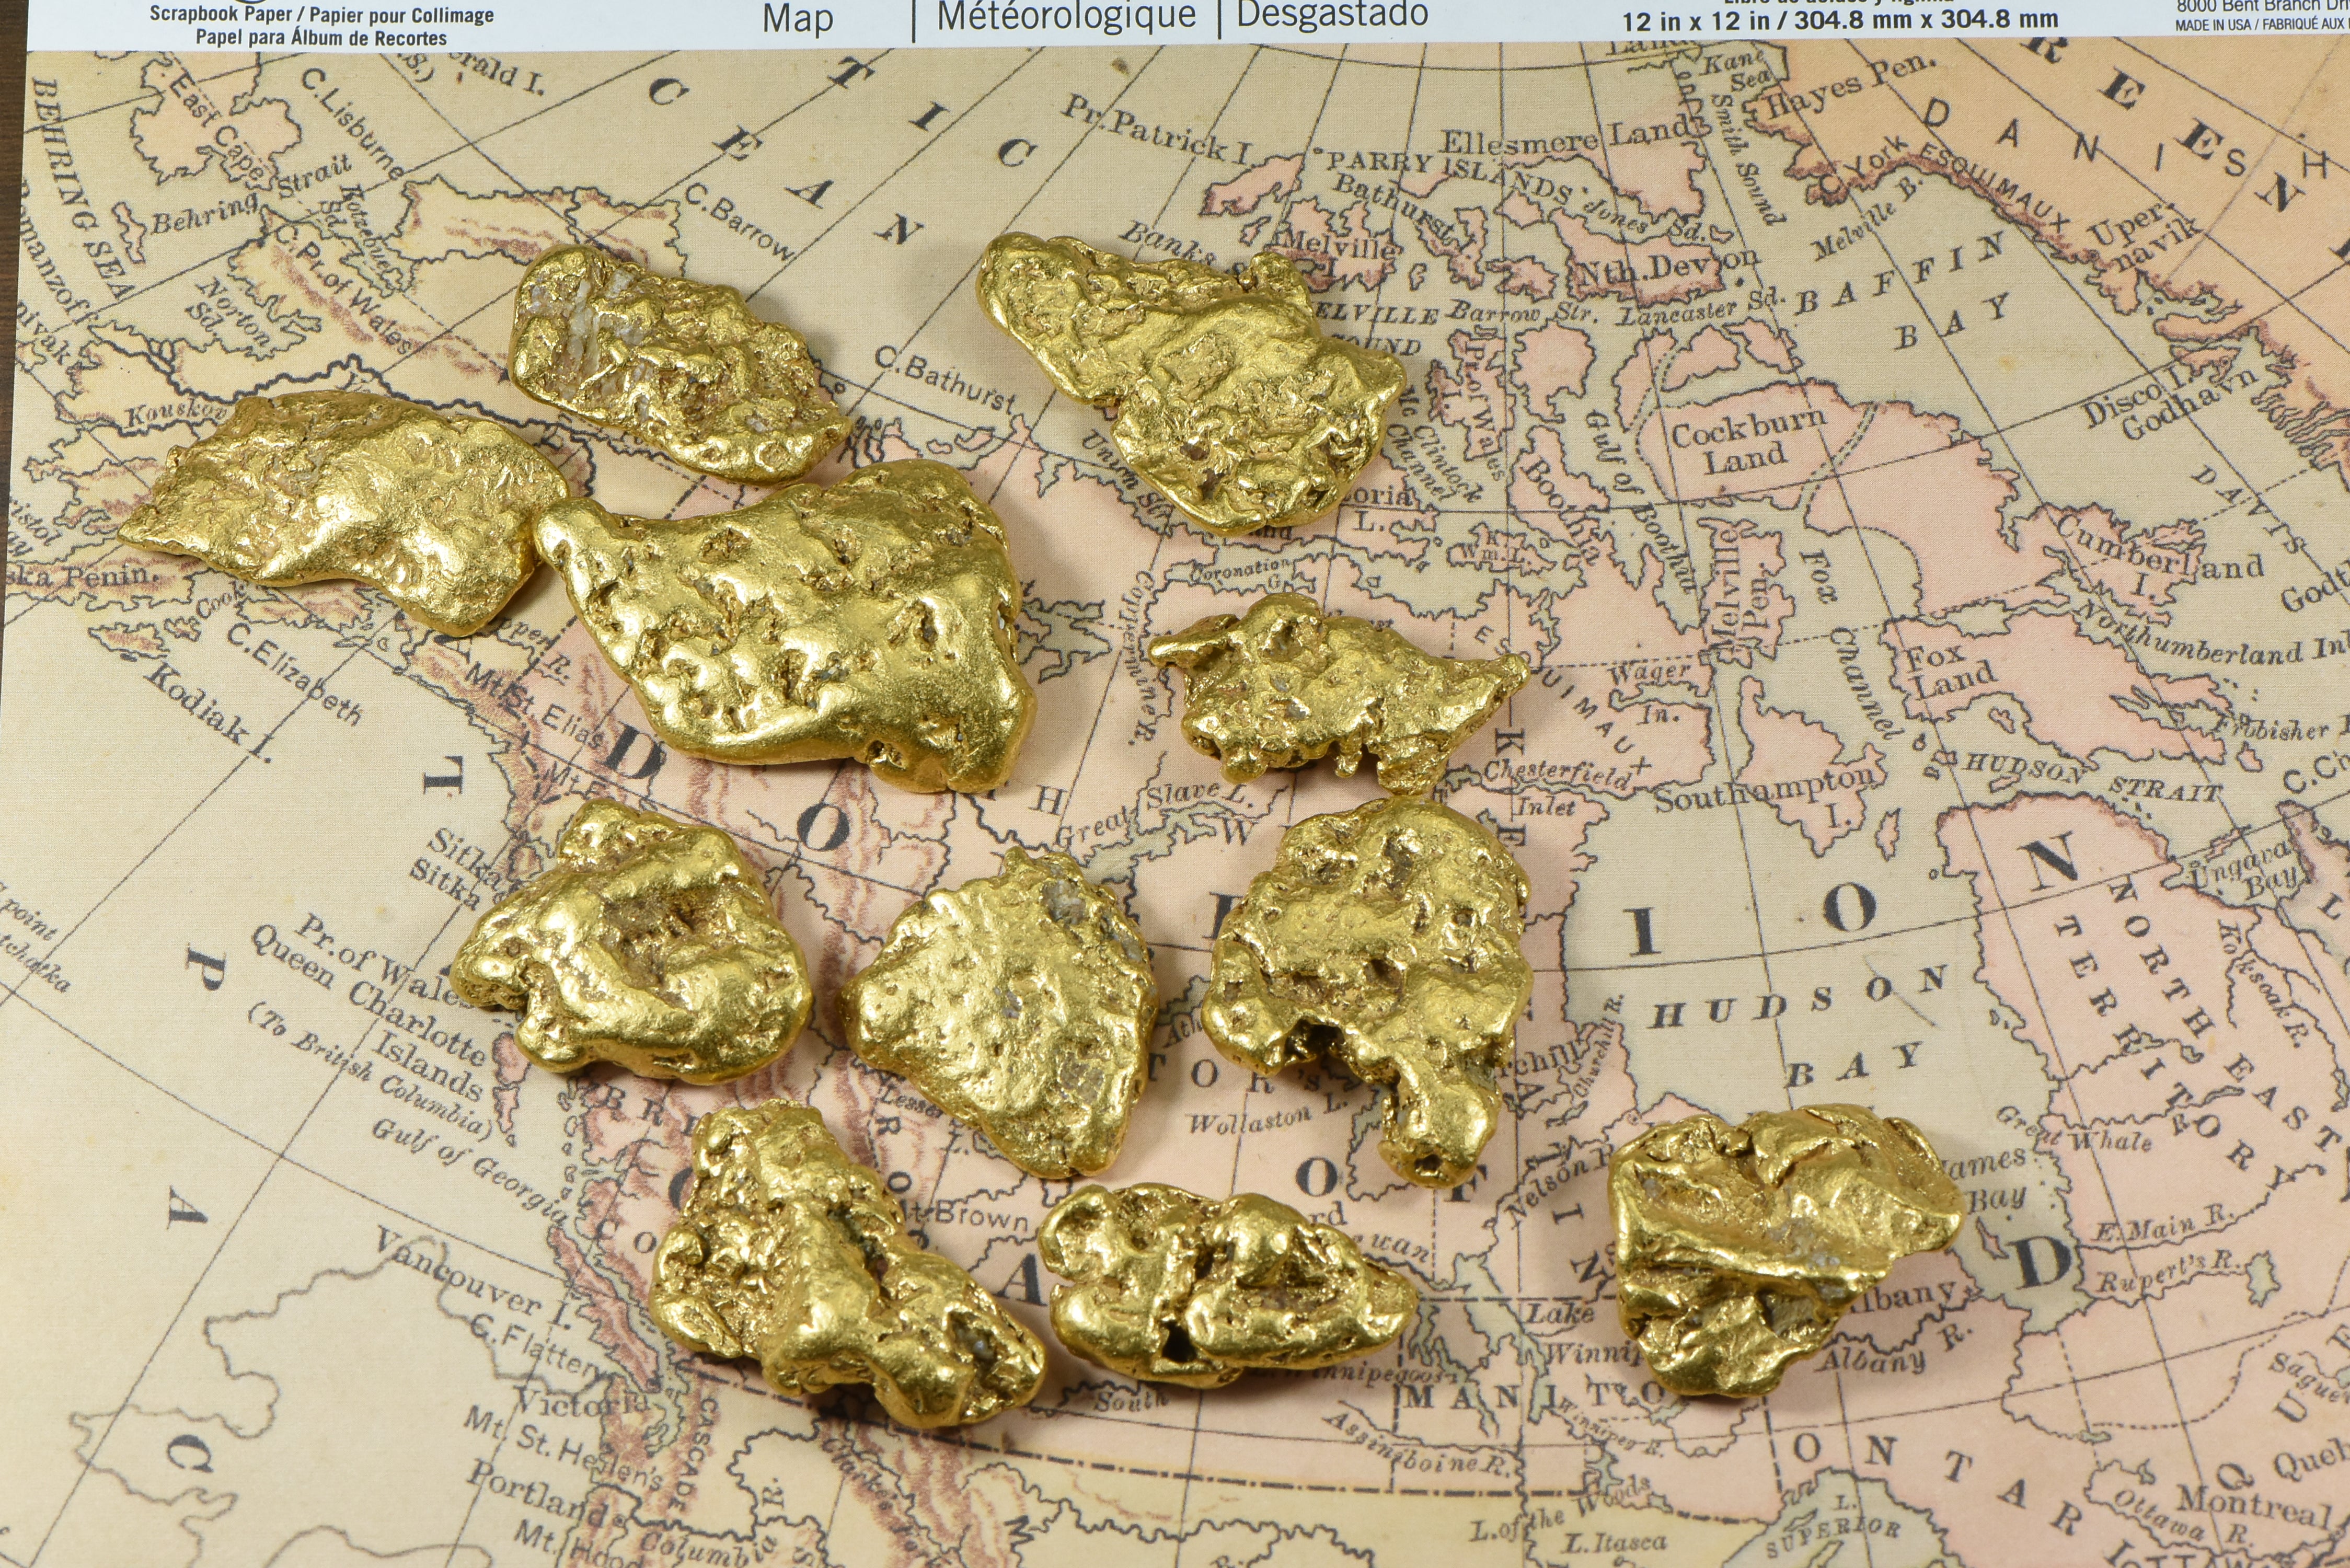 4 Types of Natural Gold Nuggets: A Quick Guide